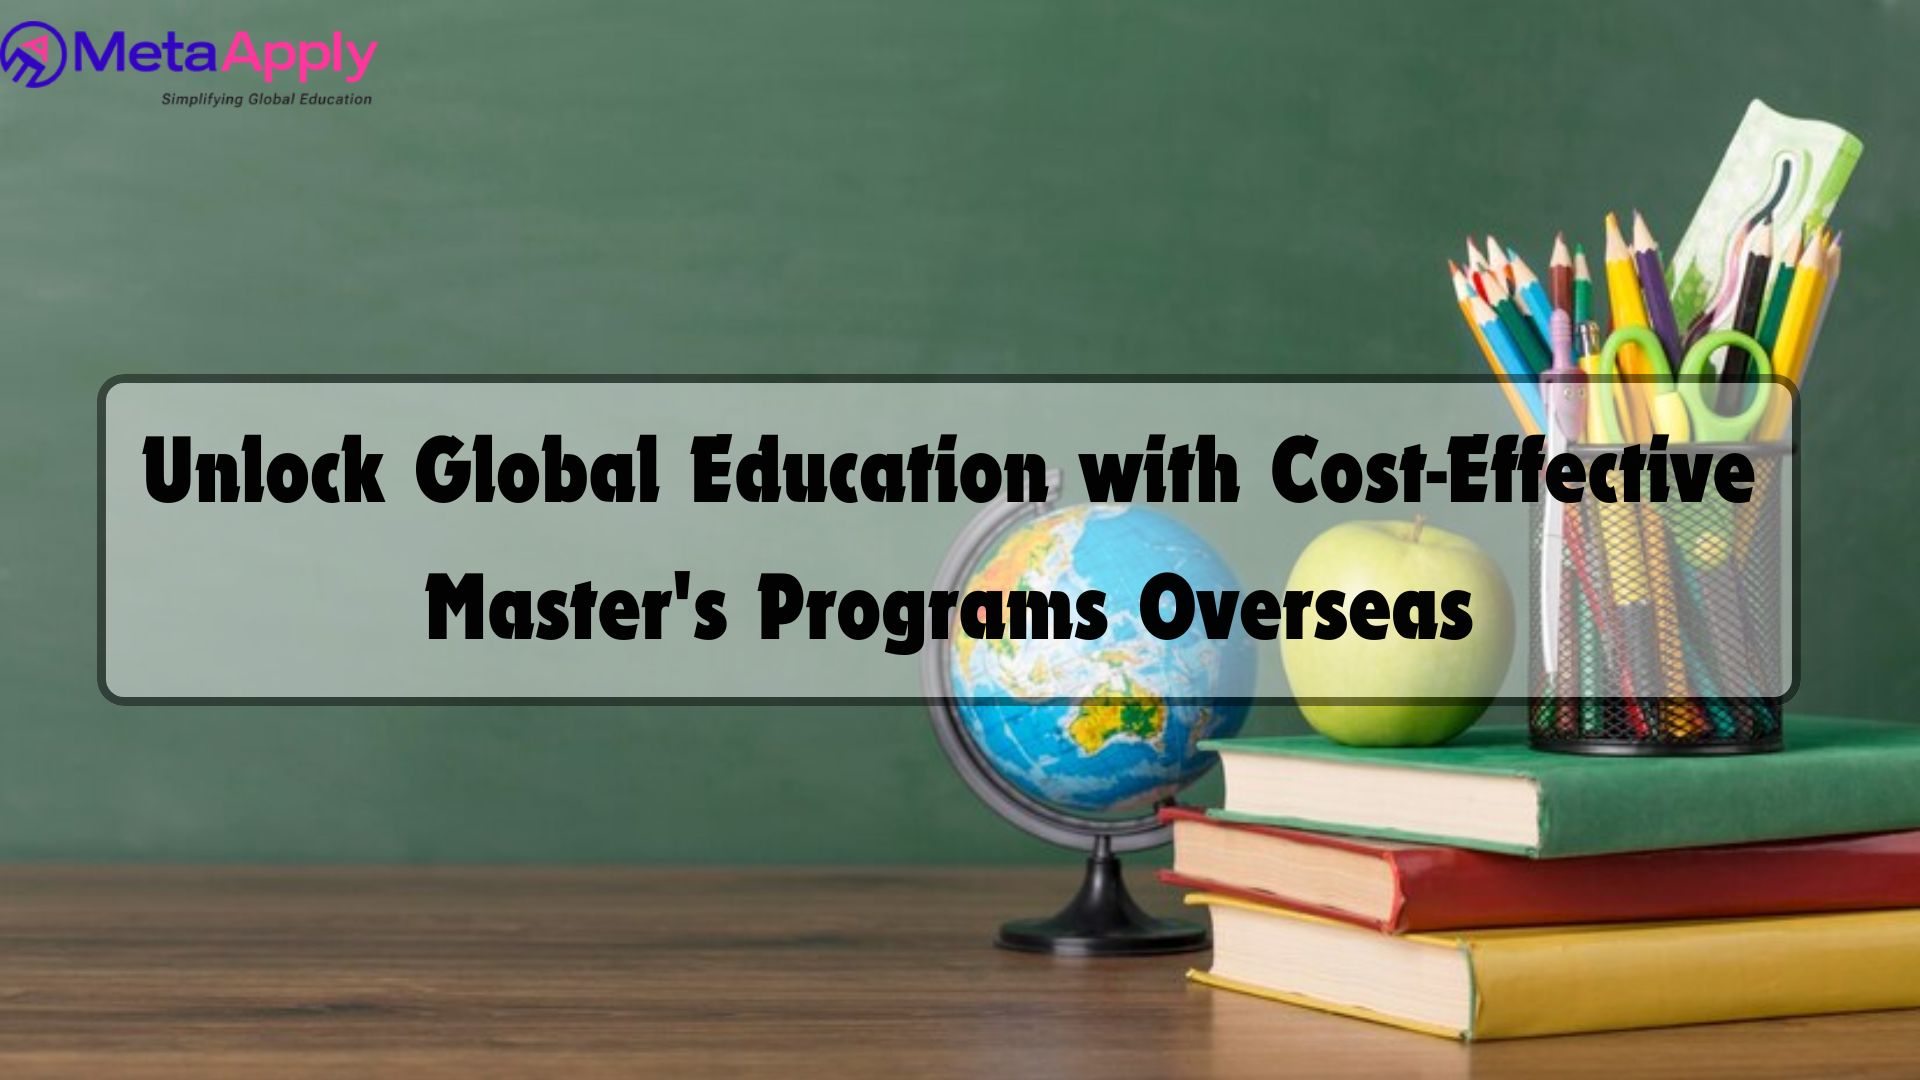 Unlock Global Education with Cost-Effective Master's Programs Overseas